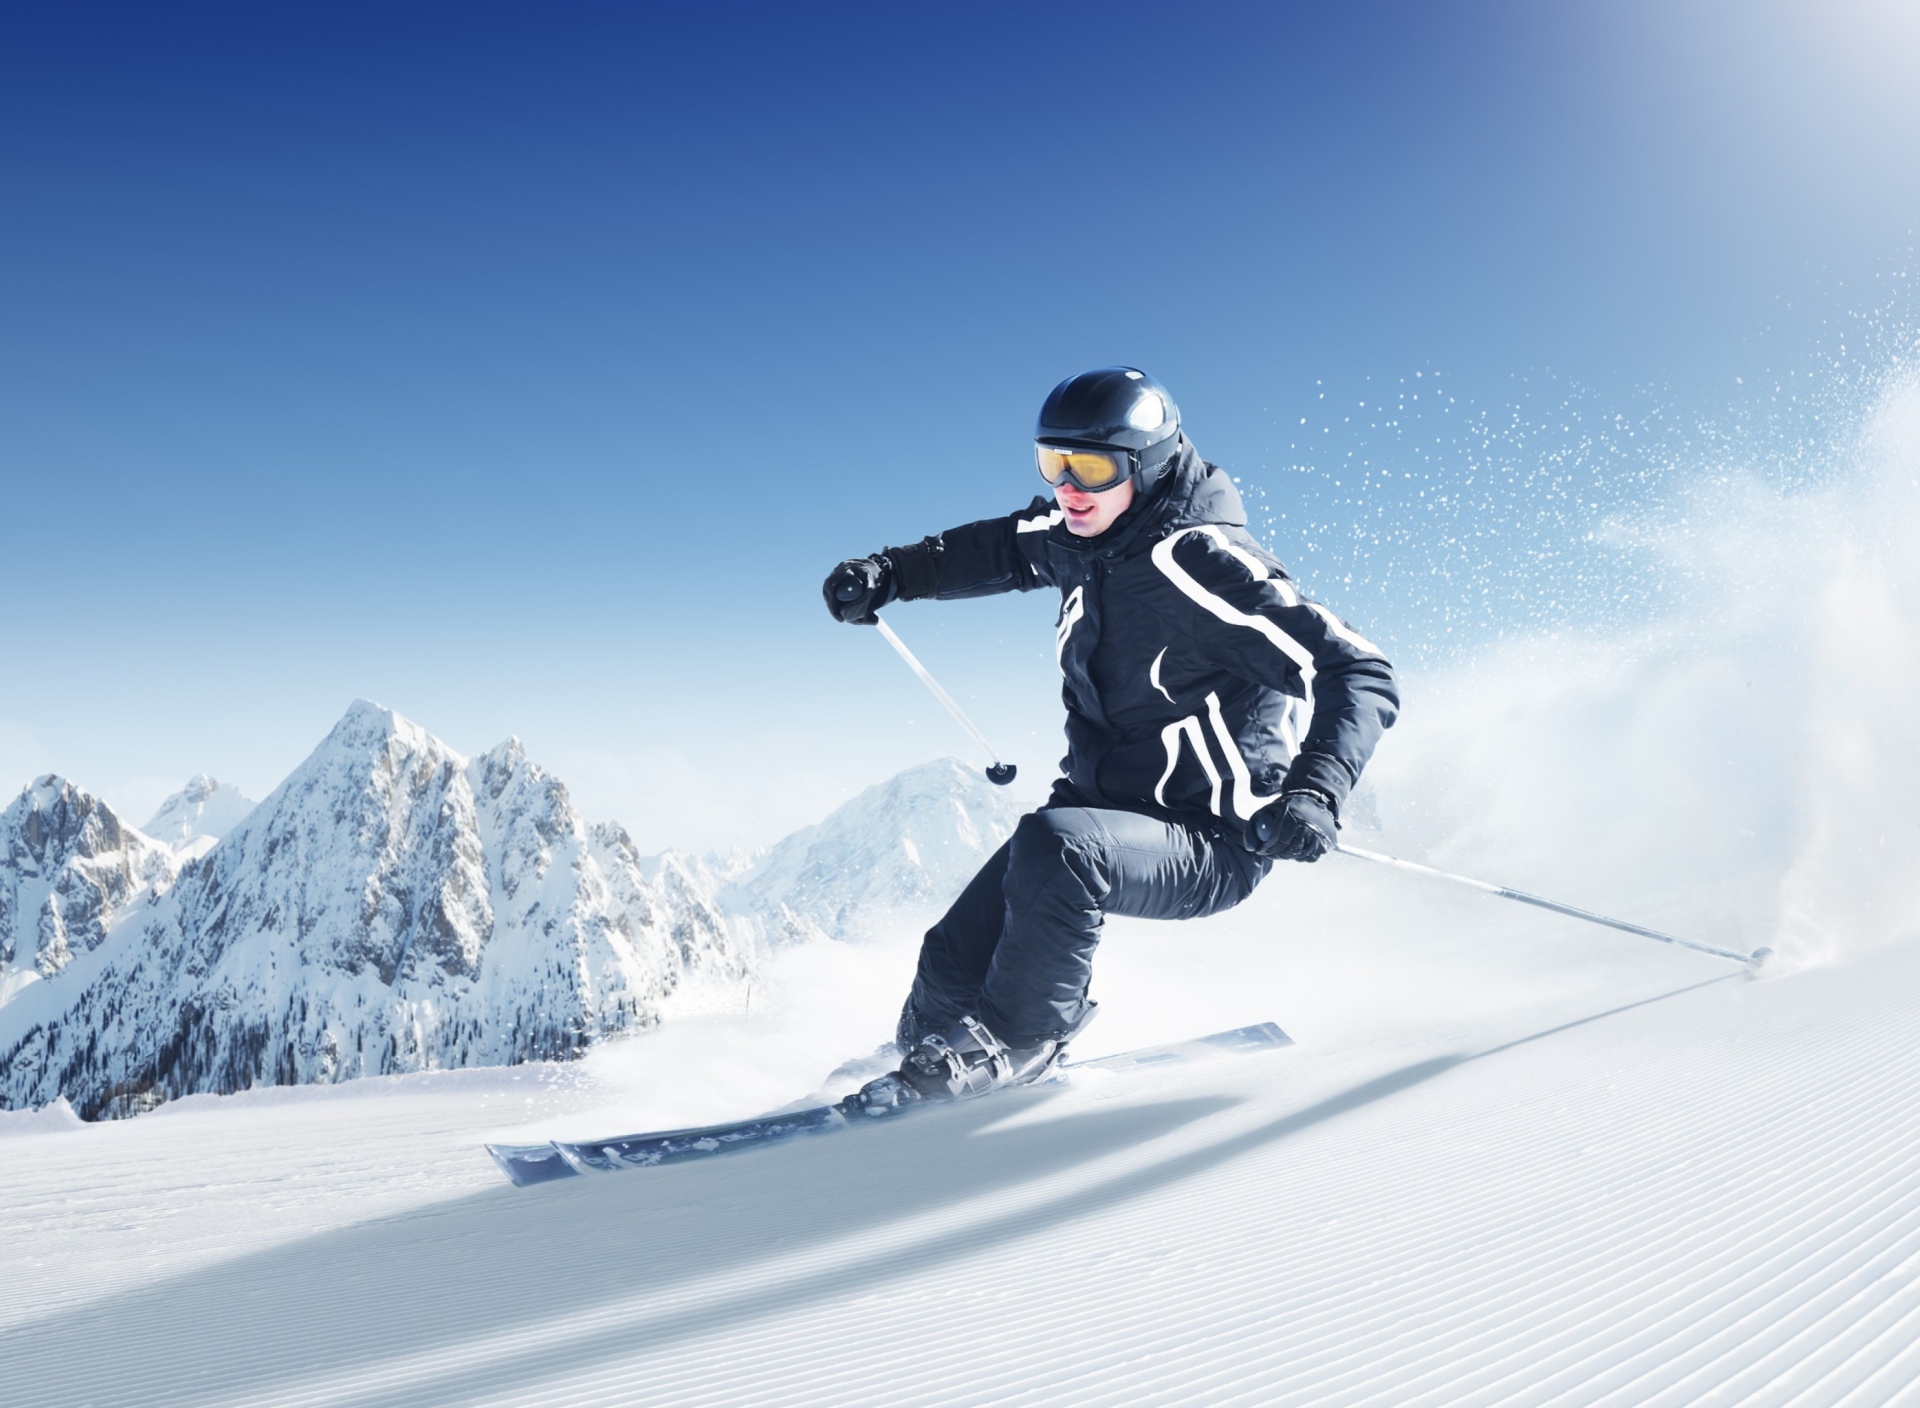 Skiing In Snowy Mountains wallpaper 1920x1408